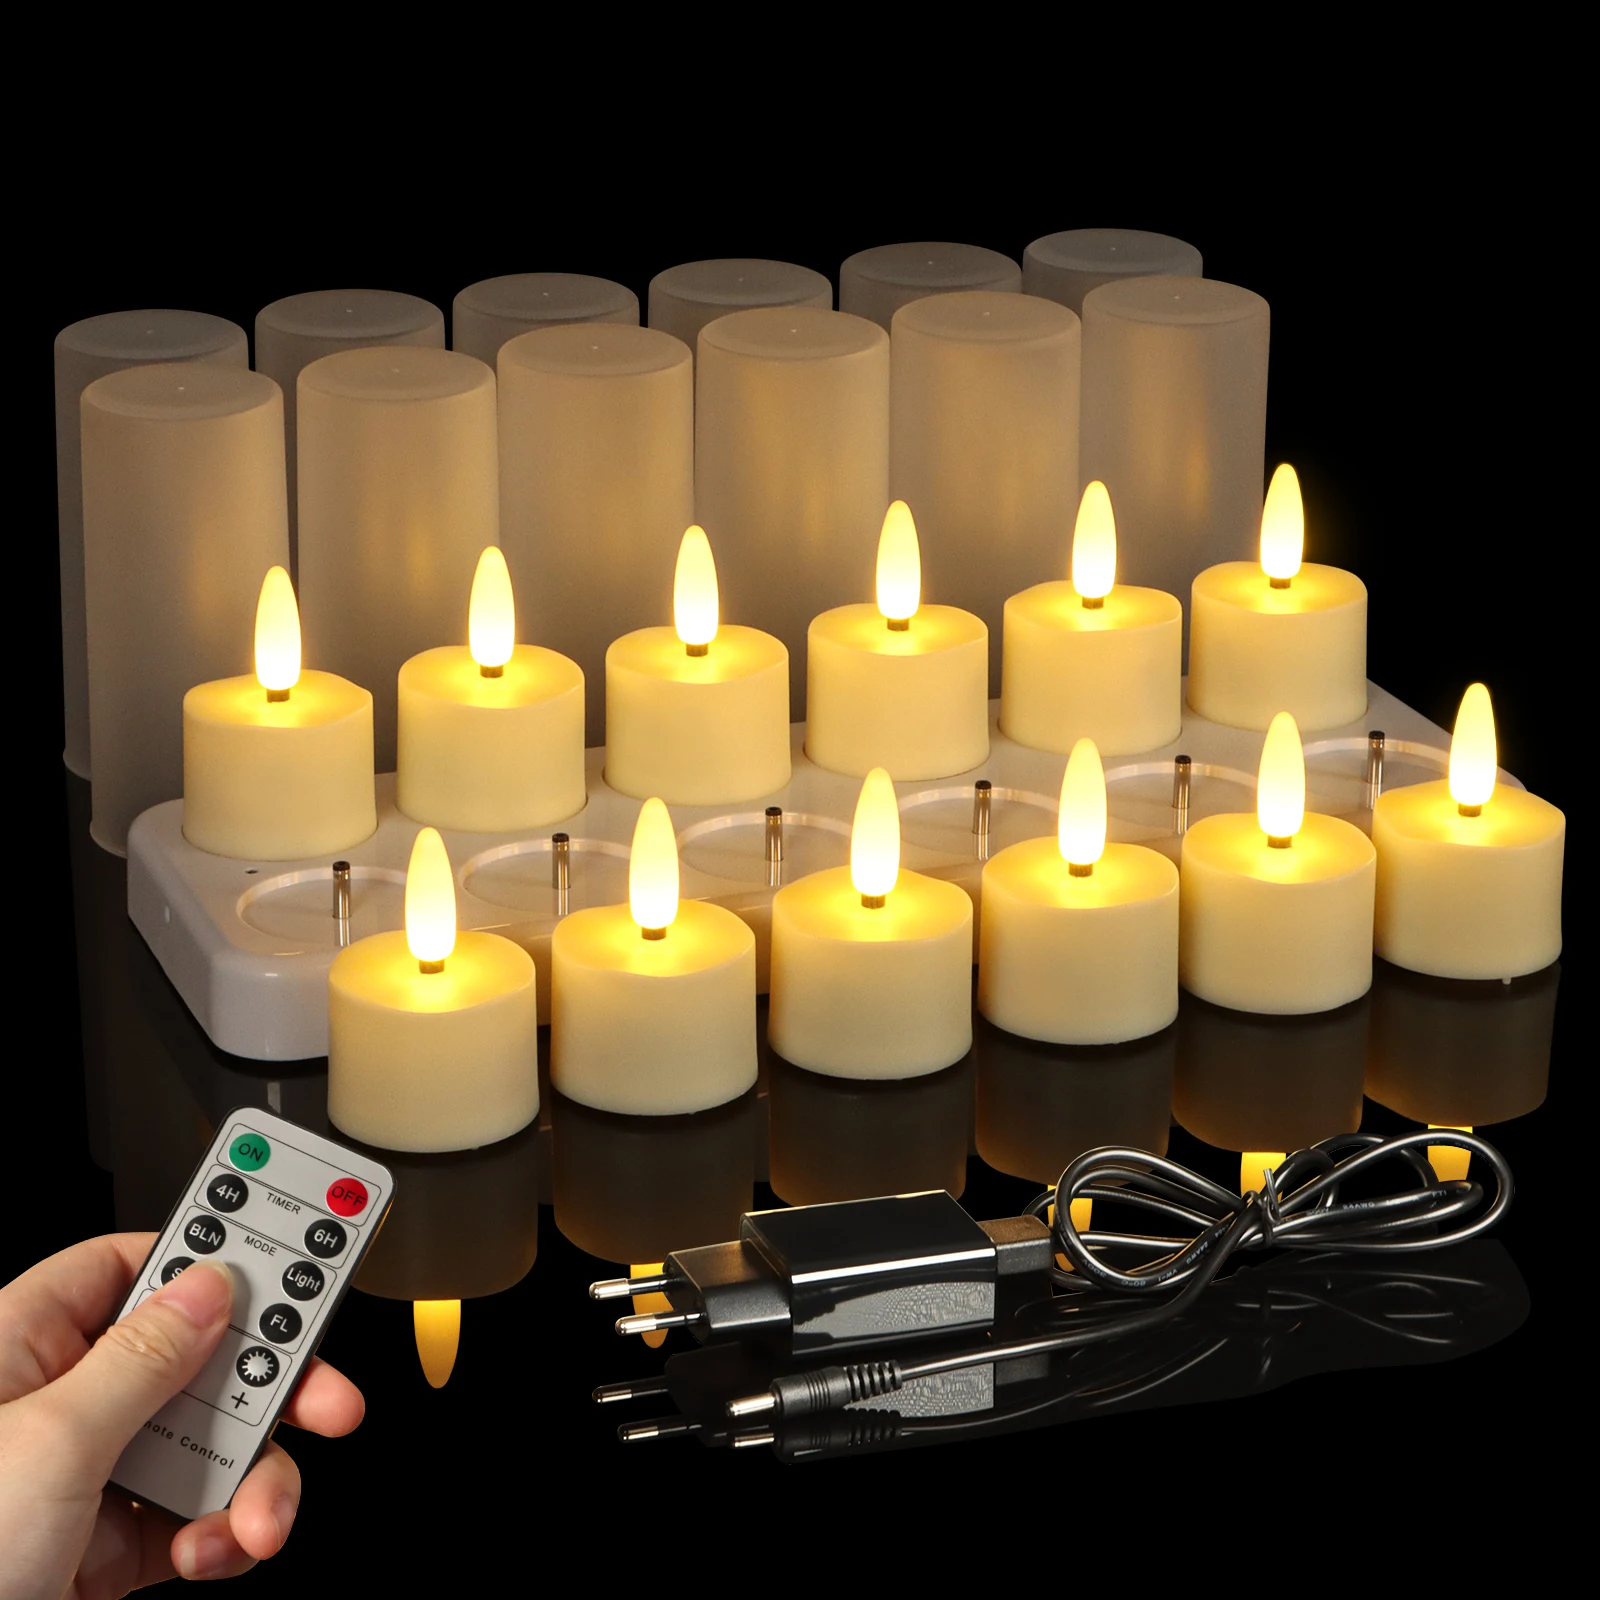 ﻿ Led Electronic Candles Set USB Rechargeable Tea Lights Flicker Flame Lamp With Timer Remote For Wedding Home Decoration Candle